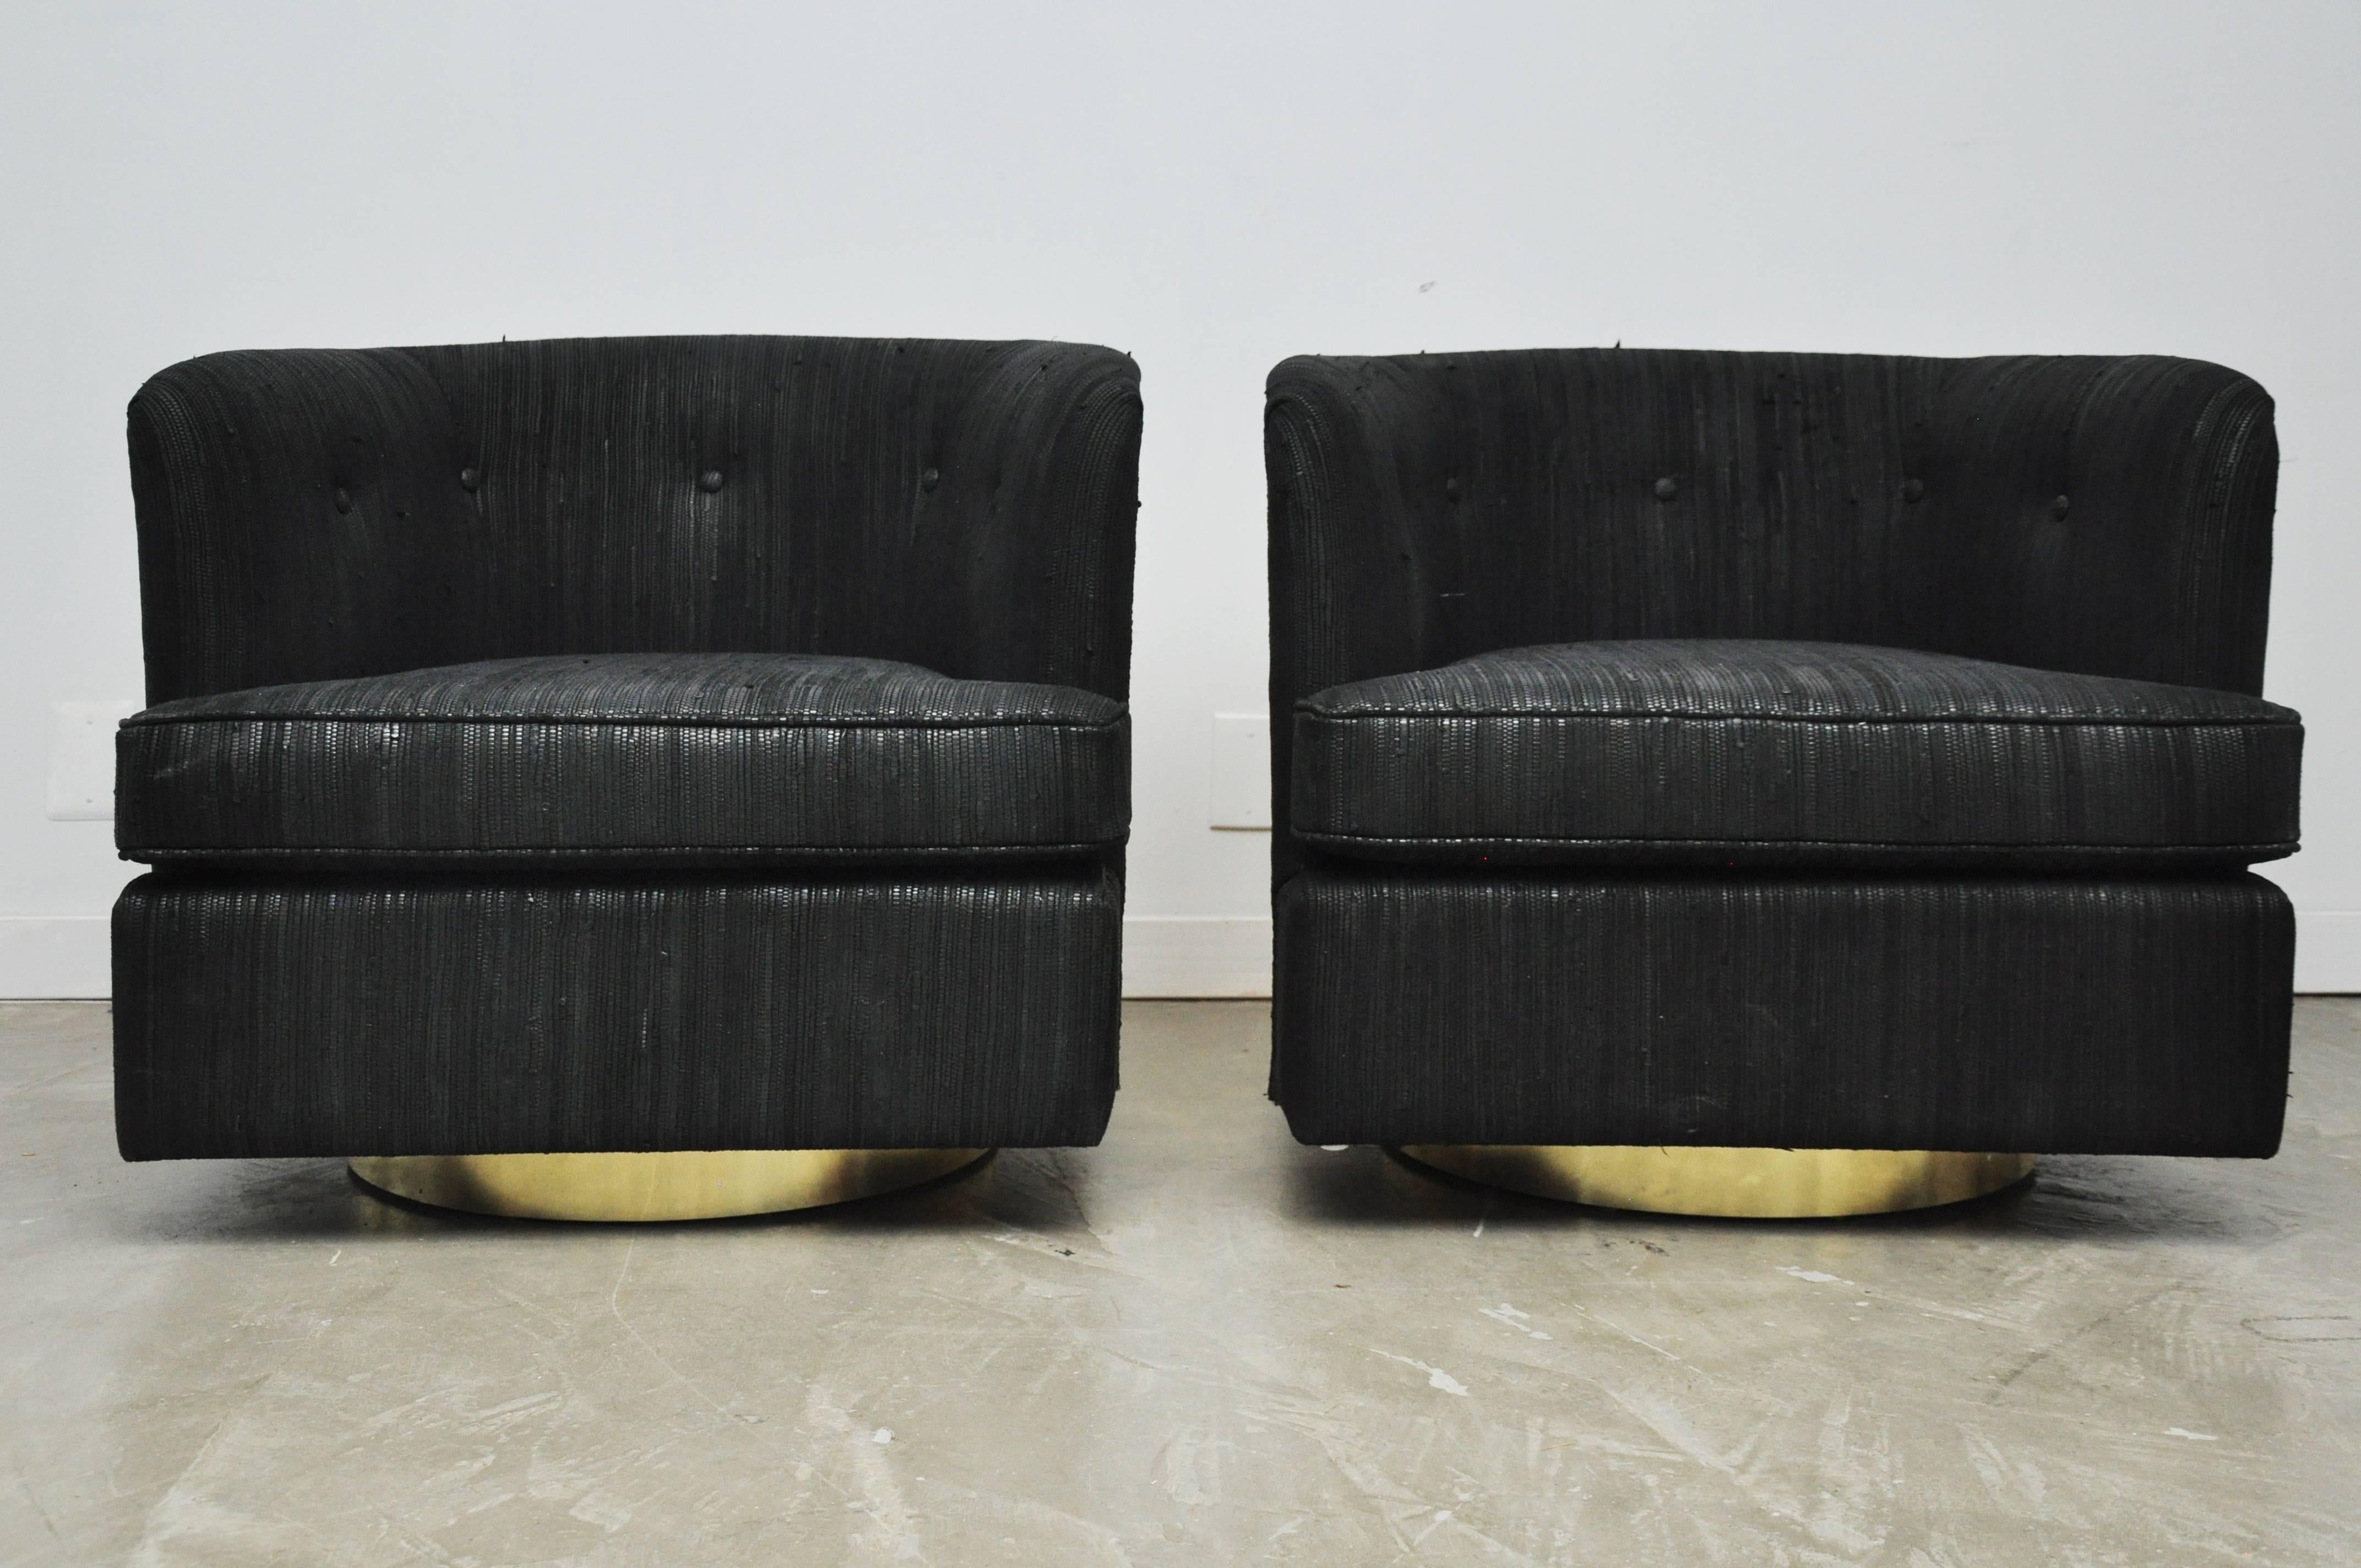 Milo Baughman swivel chairs with brass cases and woven black leather upholstery. Original brass backs show some signs of use, though good condition for age.